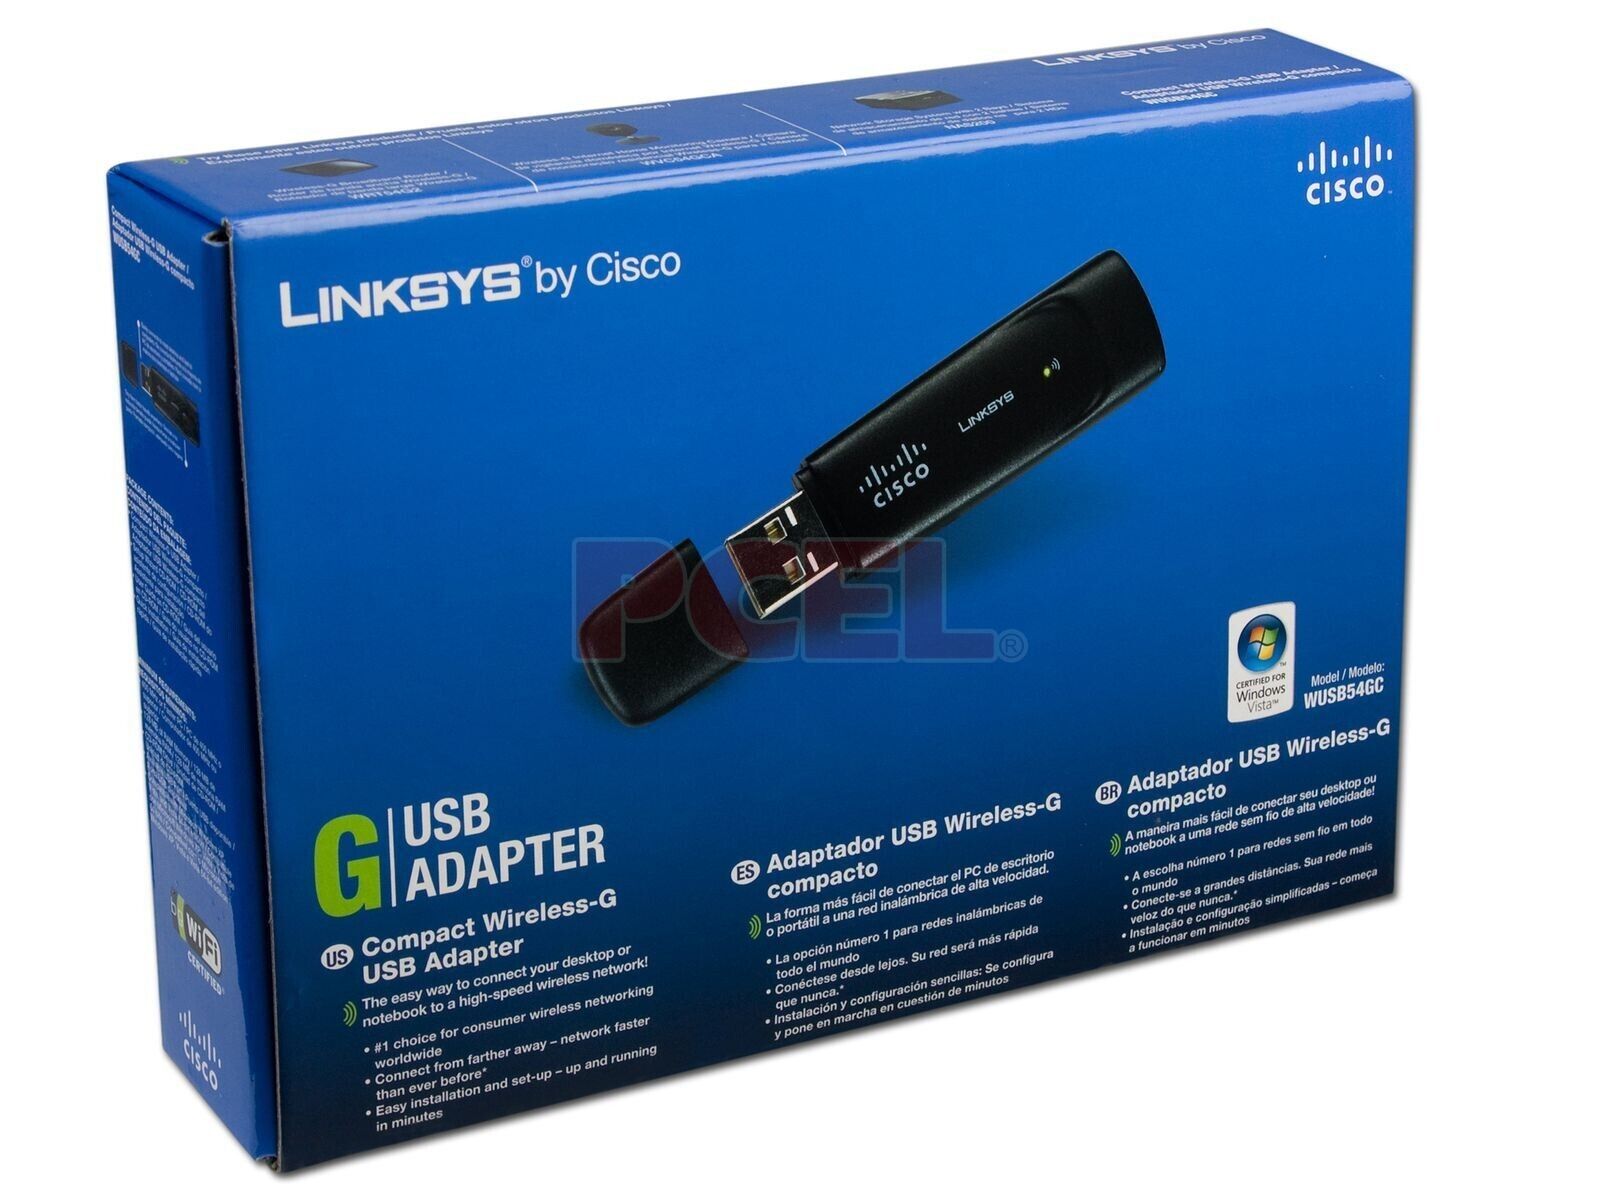 Linksys WUSB54GC Compact Wireless-G USB 2.0 WIFI Network Card Adapter Dongle